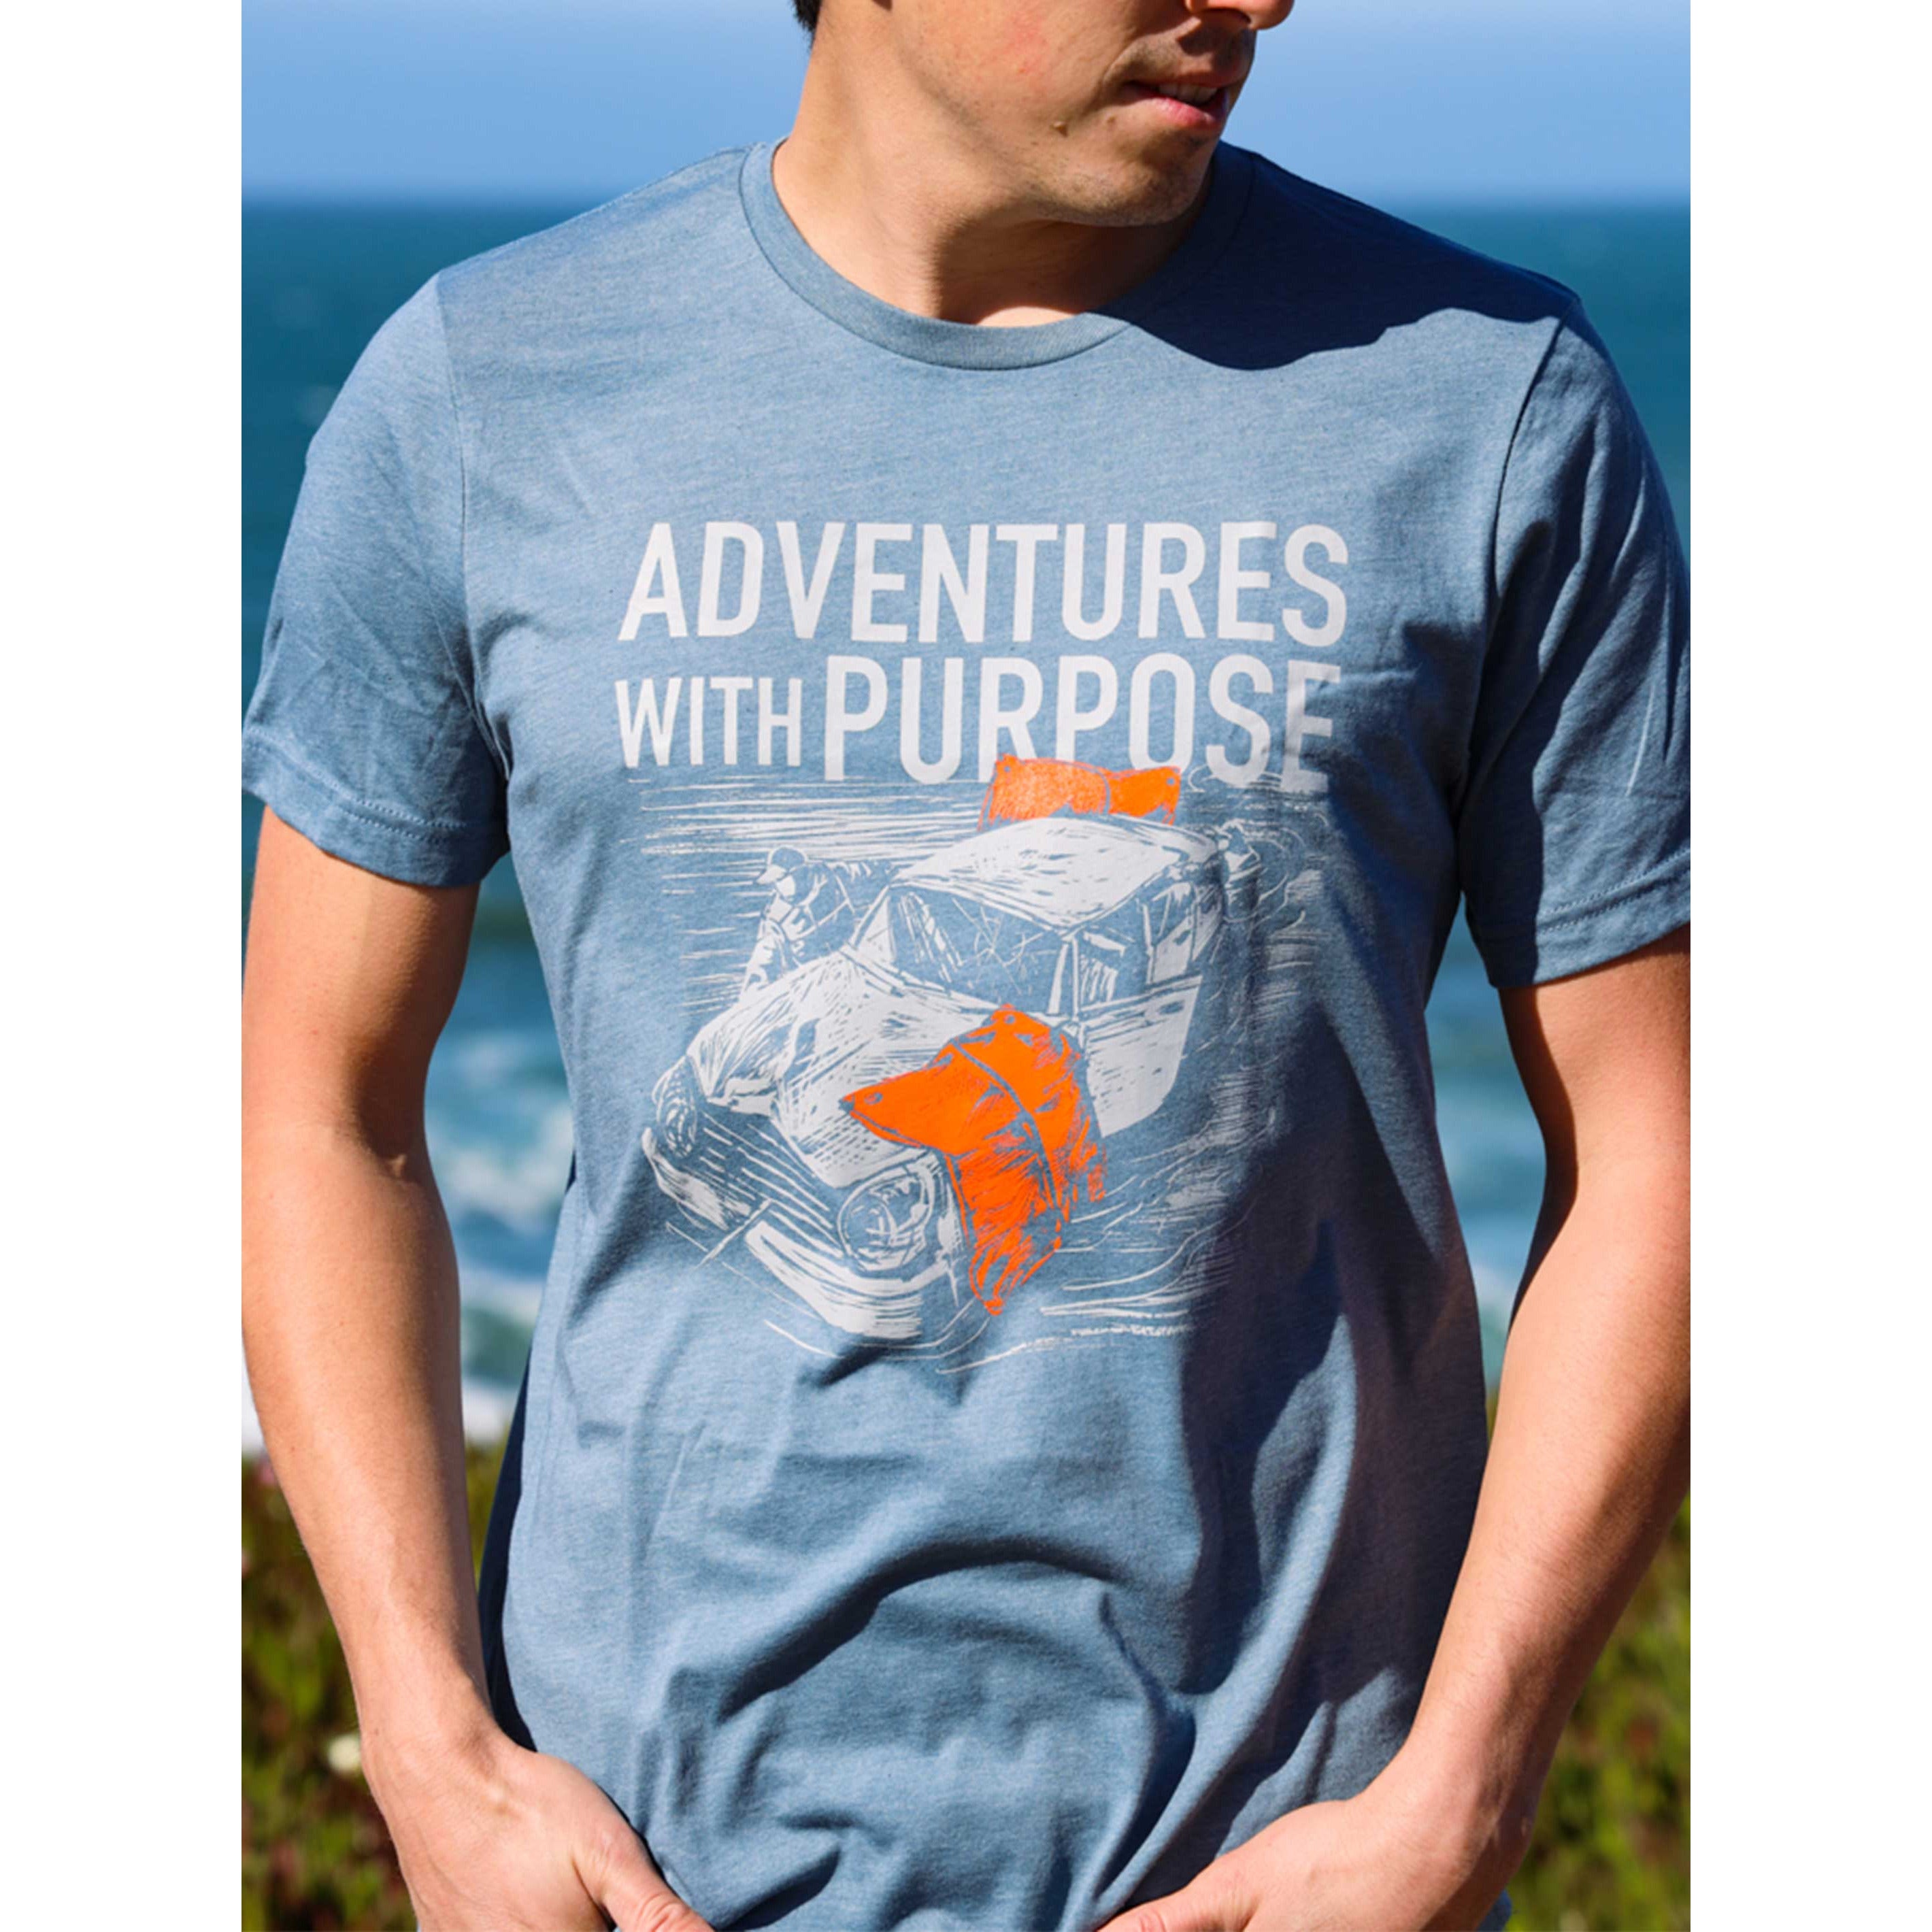 ADVENTURES WITH PURPOSE Premium Crew T-Shirt w/ CAR and LIFT BAGS on Front